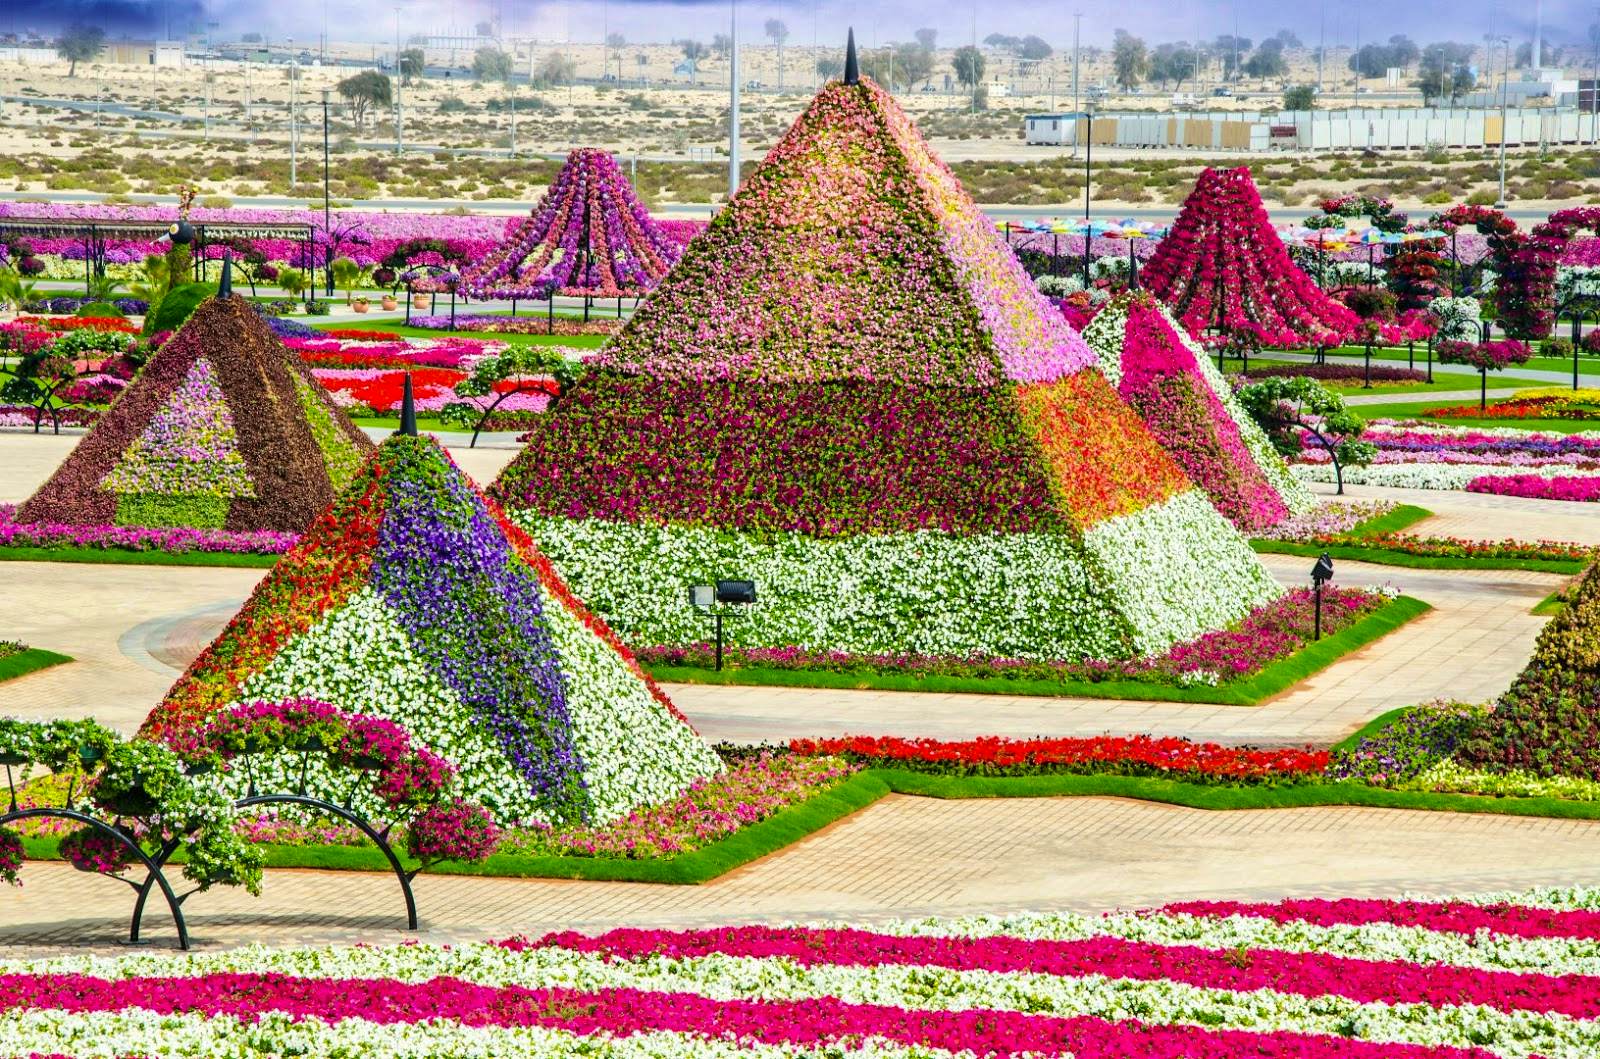 Experience the Beauty of Miracle Garden Dubai & Global Village with Transfer Seat in Coach